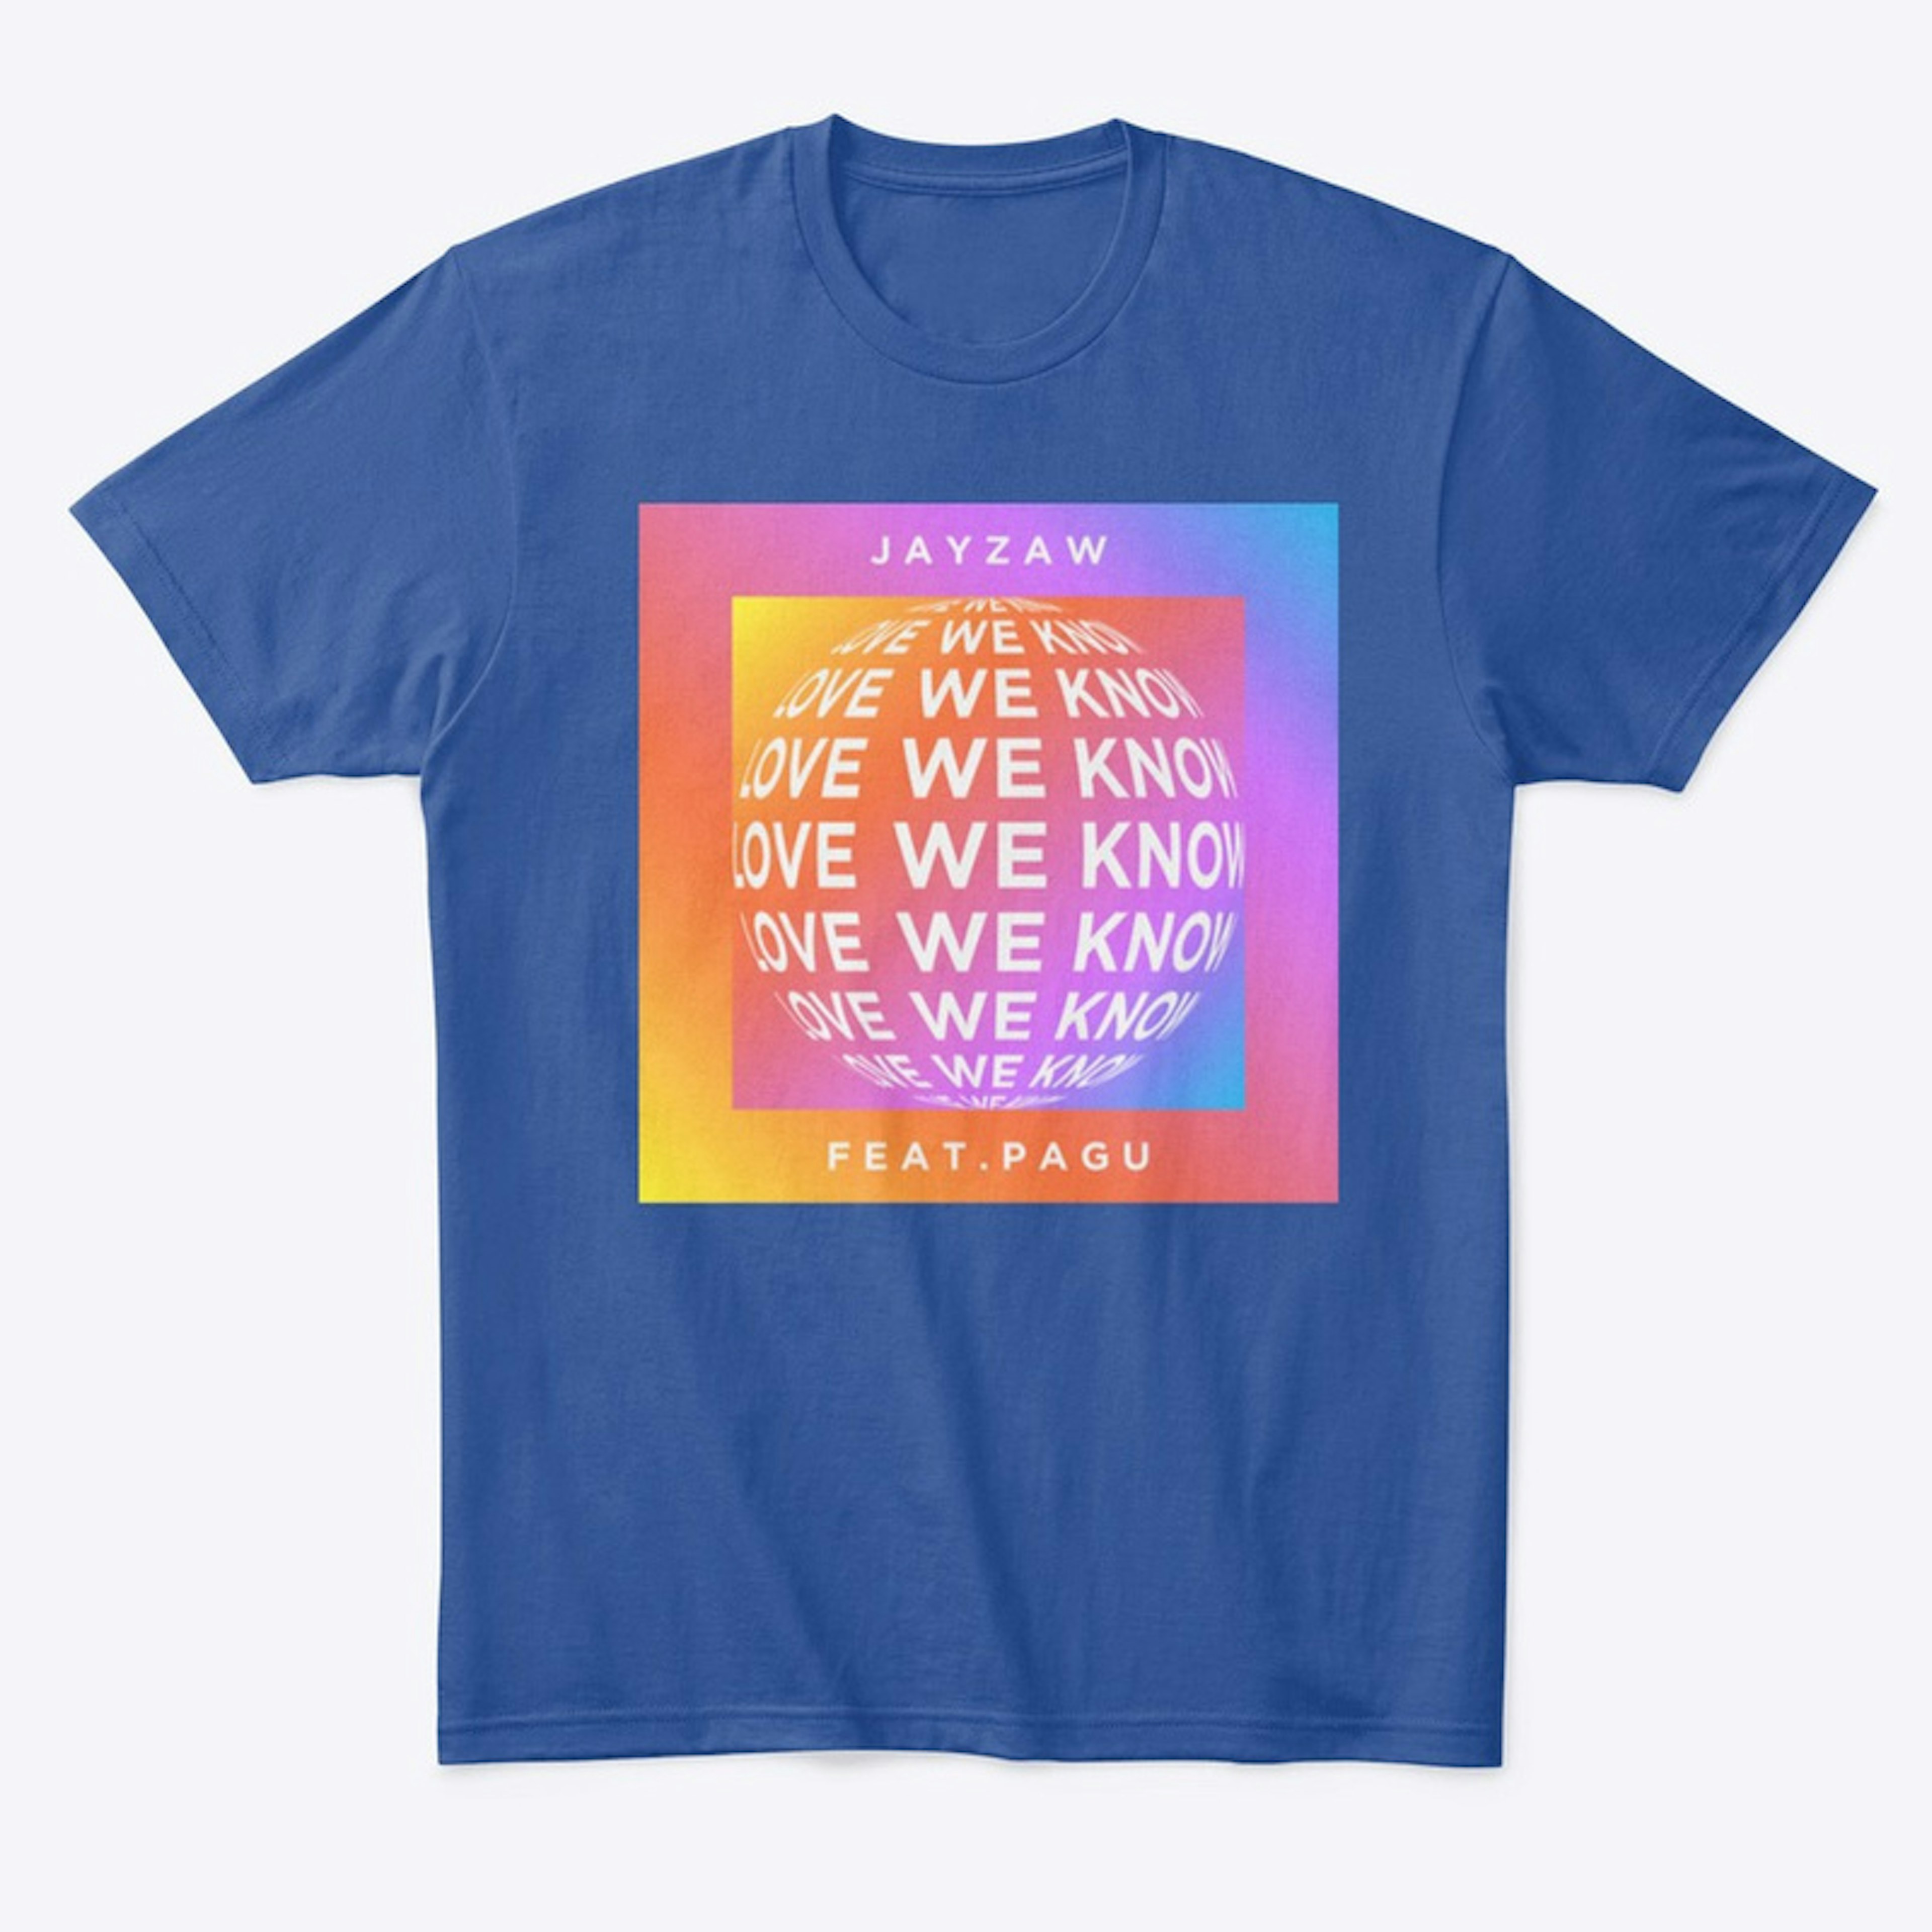 Love We Know - T-Shirt